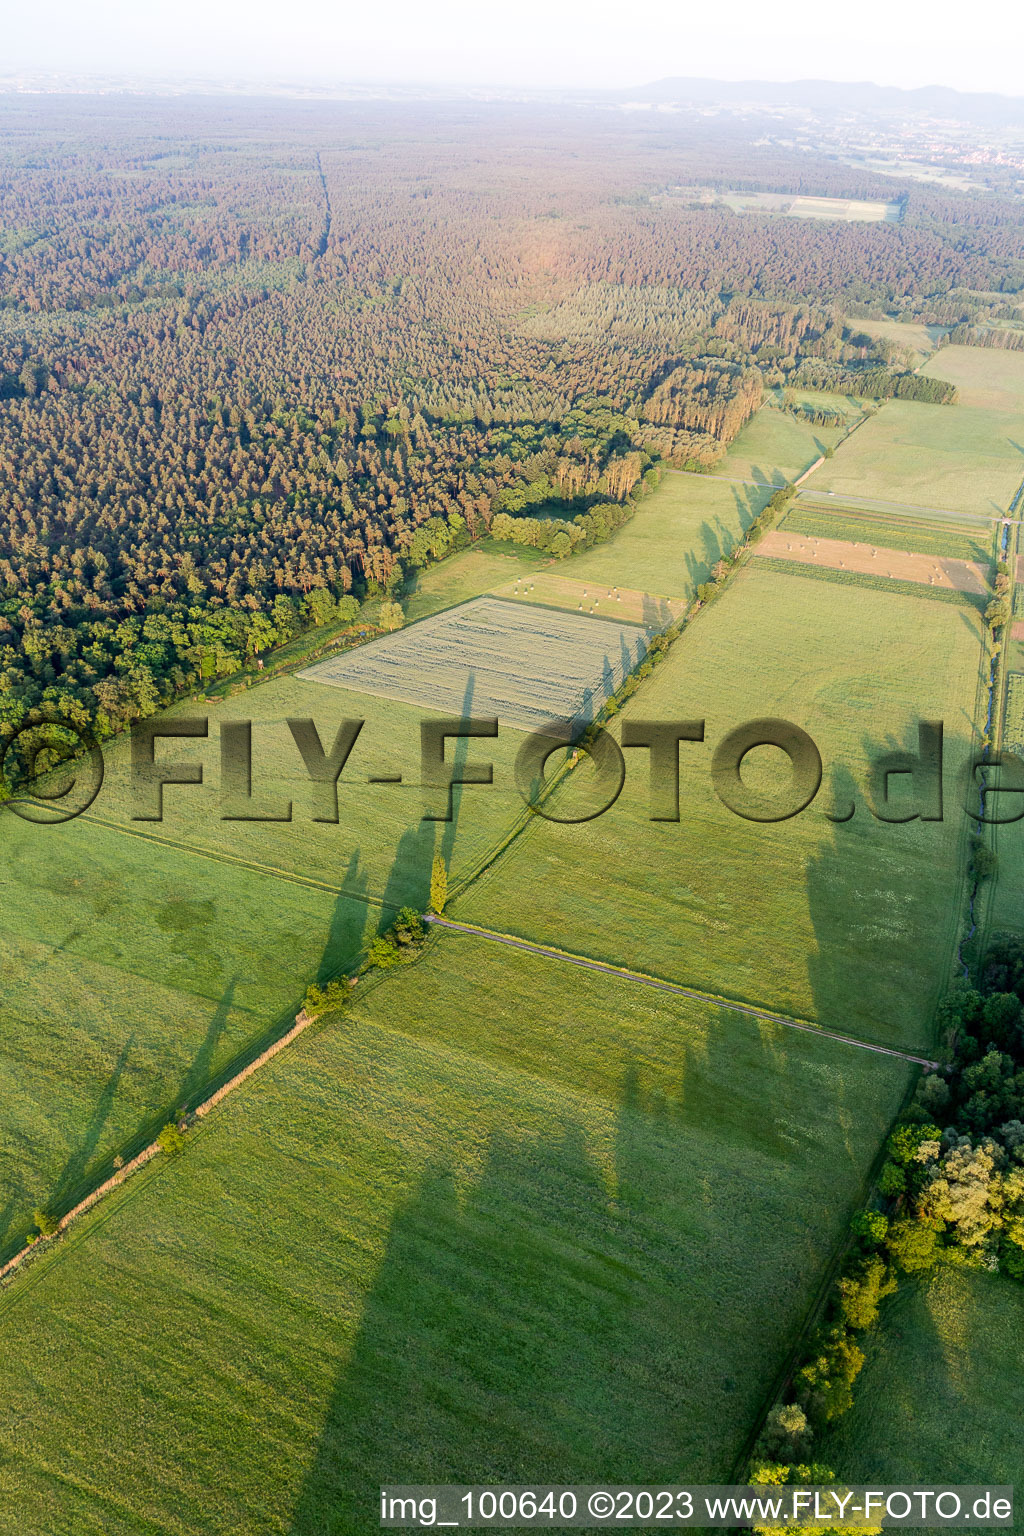 Freckenfeld in the state Rhineland-Palatinate, Germany seen from a drone